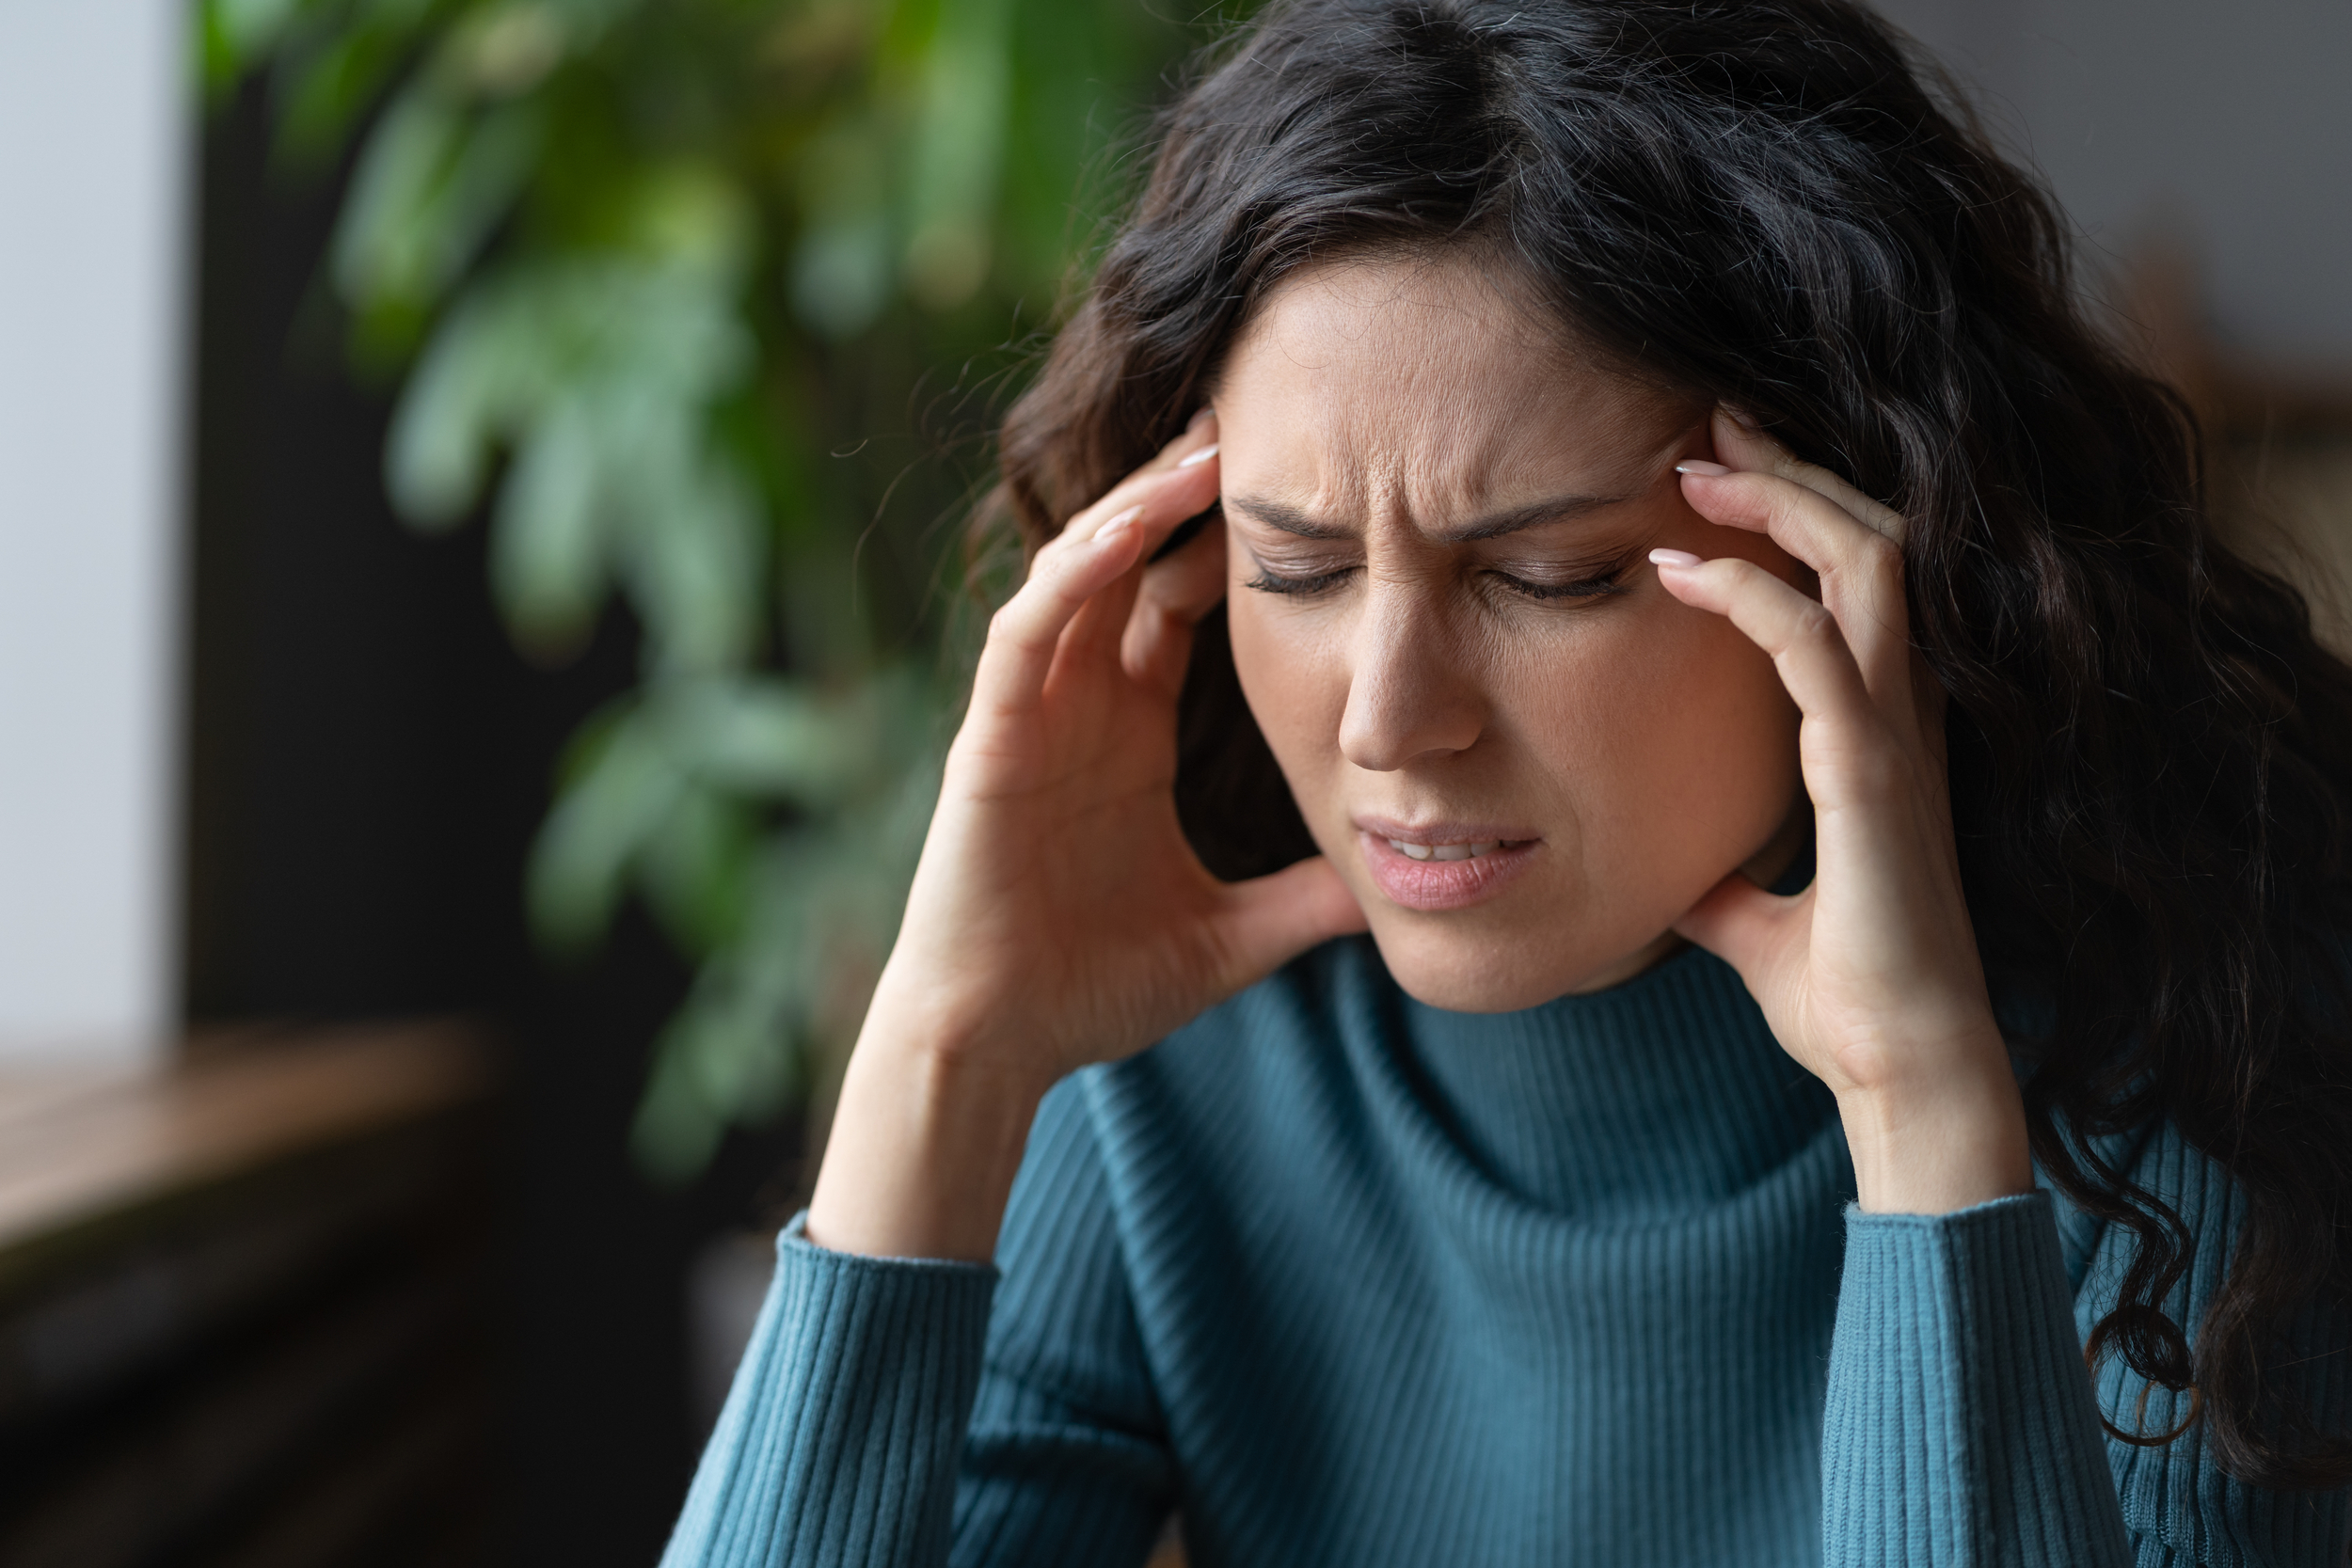 anxiety disorder stressed worried young woman with closed eyes suffering from headache or migraine